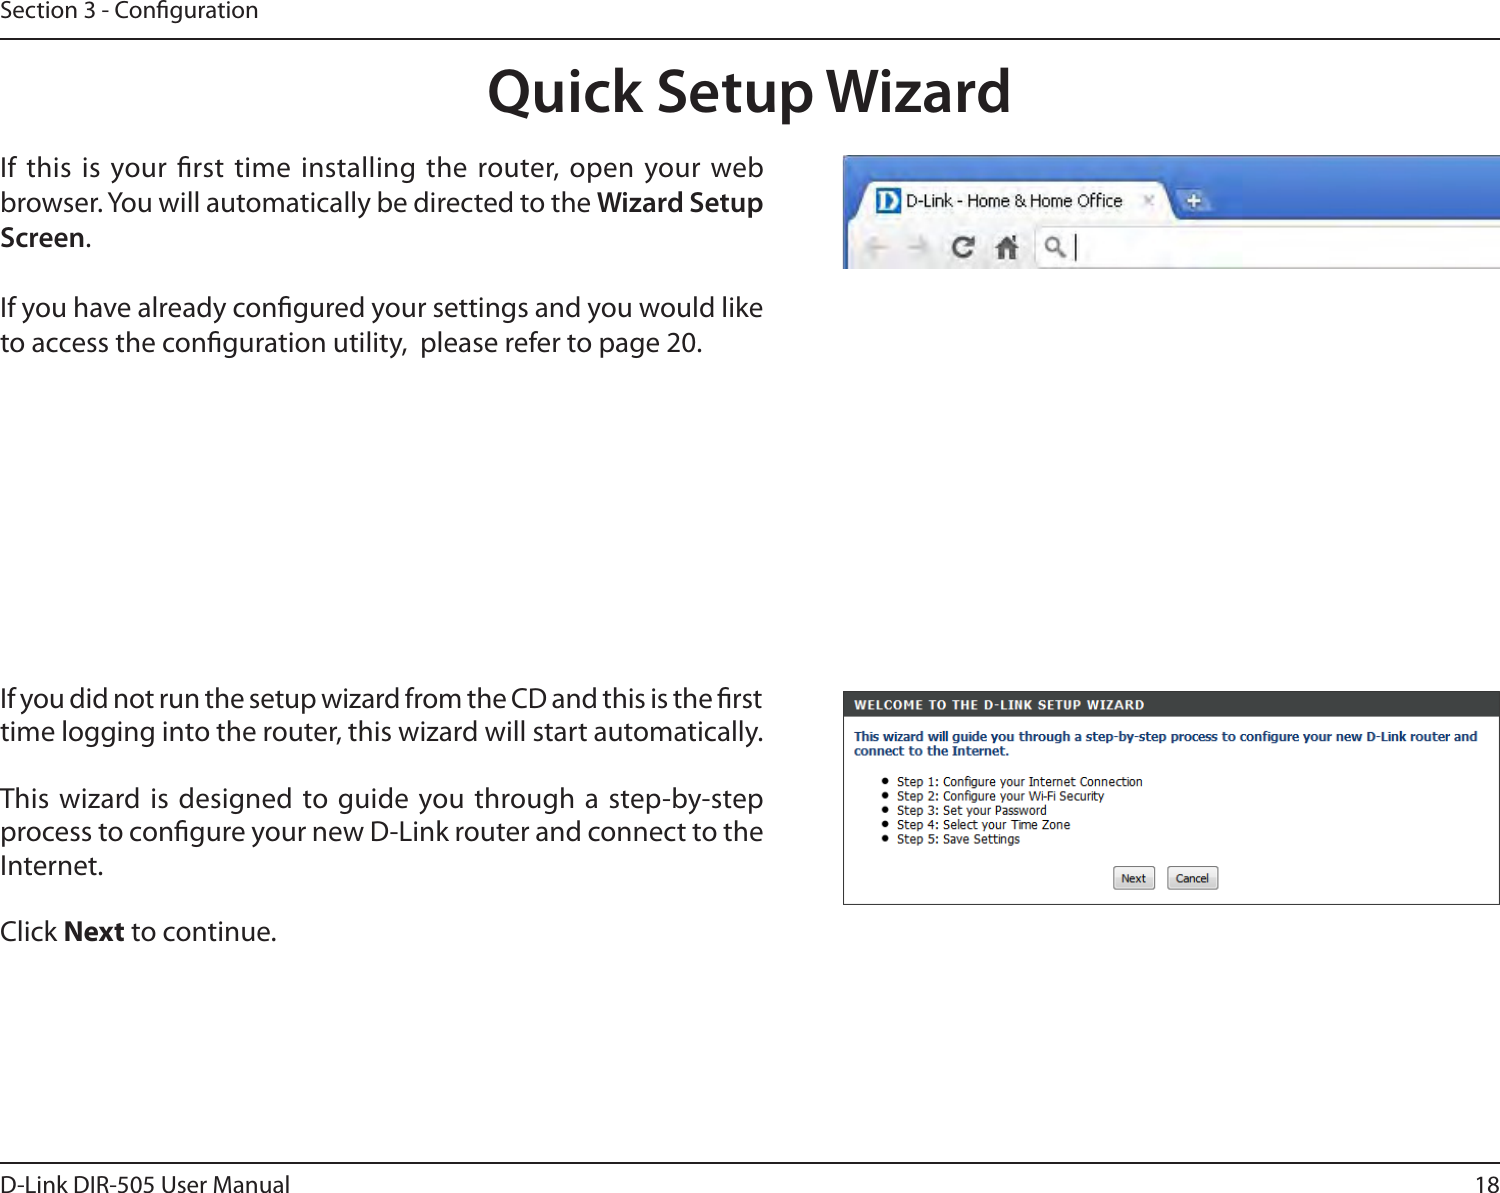 18D-Link DIR-505 User ManualSection 3 - CongurationIf you did not run the setup wizard from the CD and this is the rst time logging into the router, this wizard will start automatically. This wizard is  designed to guide you through a step-by-step process to congure your new D-Link router and connect to the Internet.Click Next to continue. Quick Setup WizardIf this  is your rst time installing  the router, open your web browser. You will automatically be directed to the Wizard Setup Screen. If you have already congured your settings and you would like to access the conguration utility,  please refer to page 20.